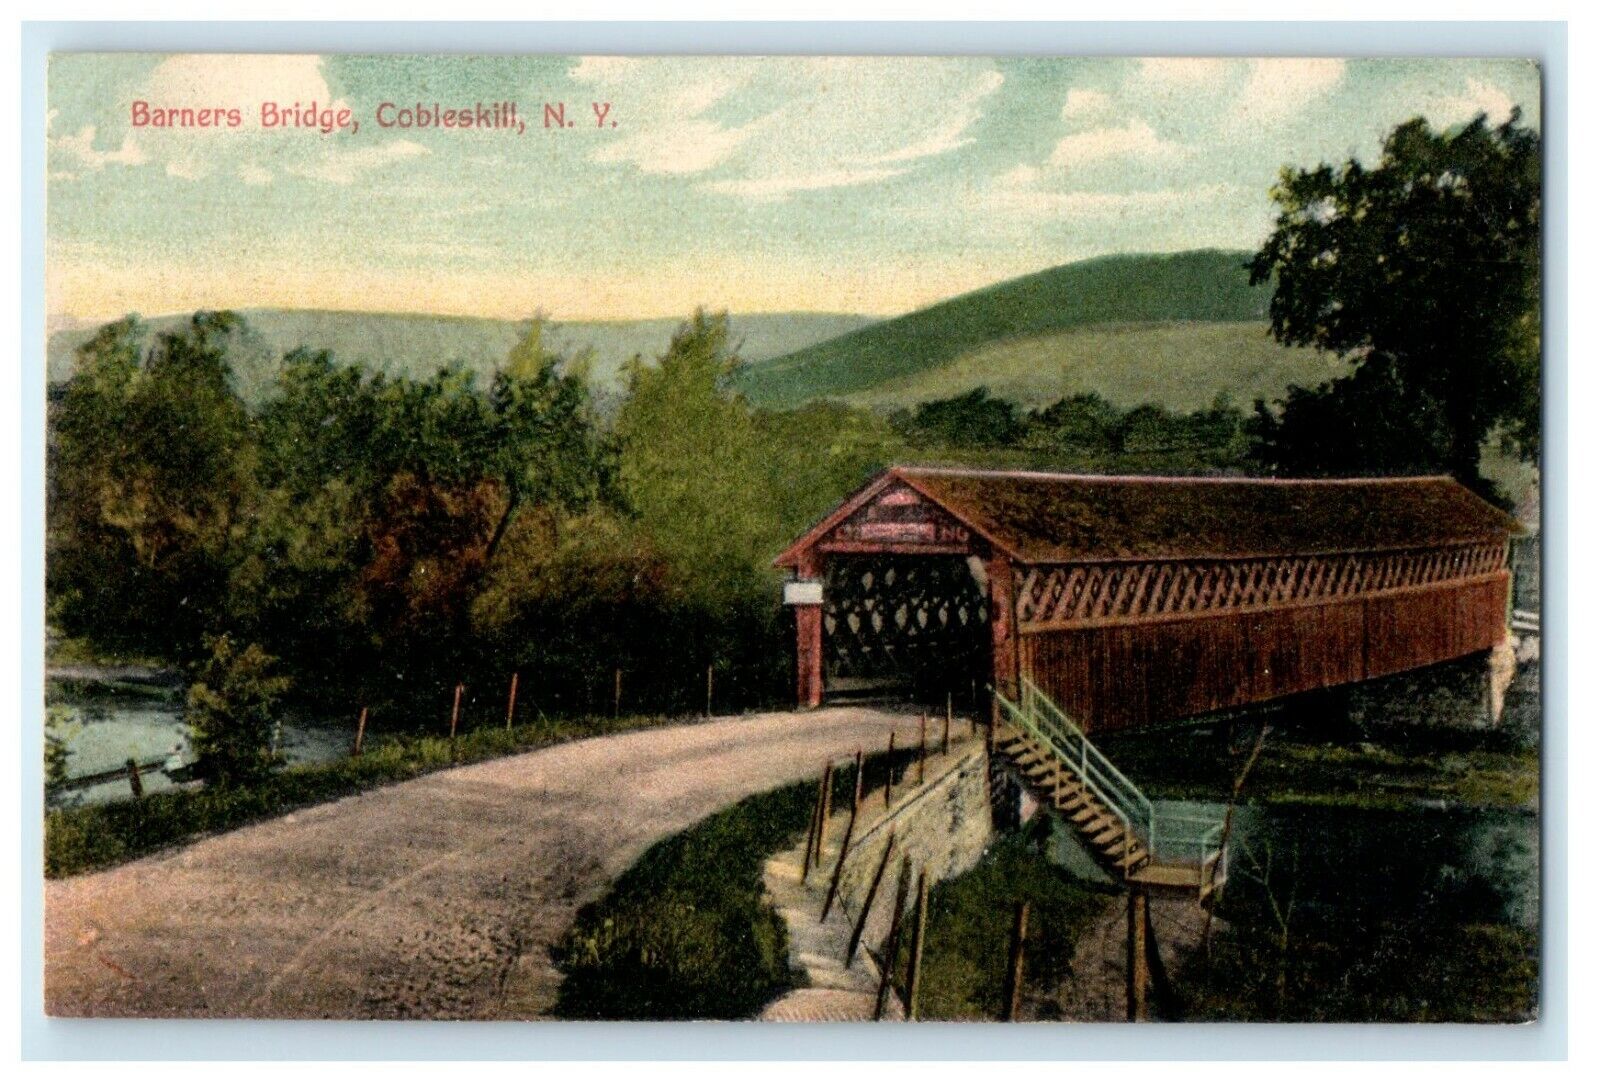 1908 View Of Barners Bridge Cobleskill New York NY Posted Antique Postcard